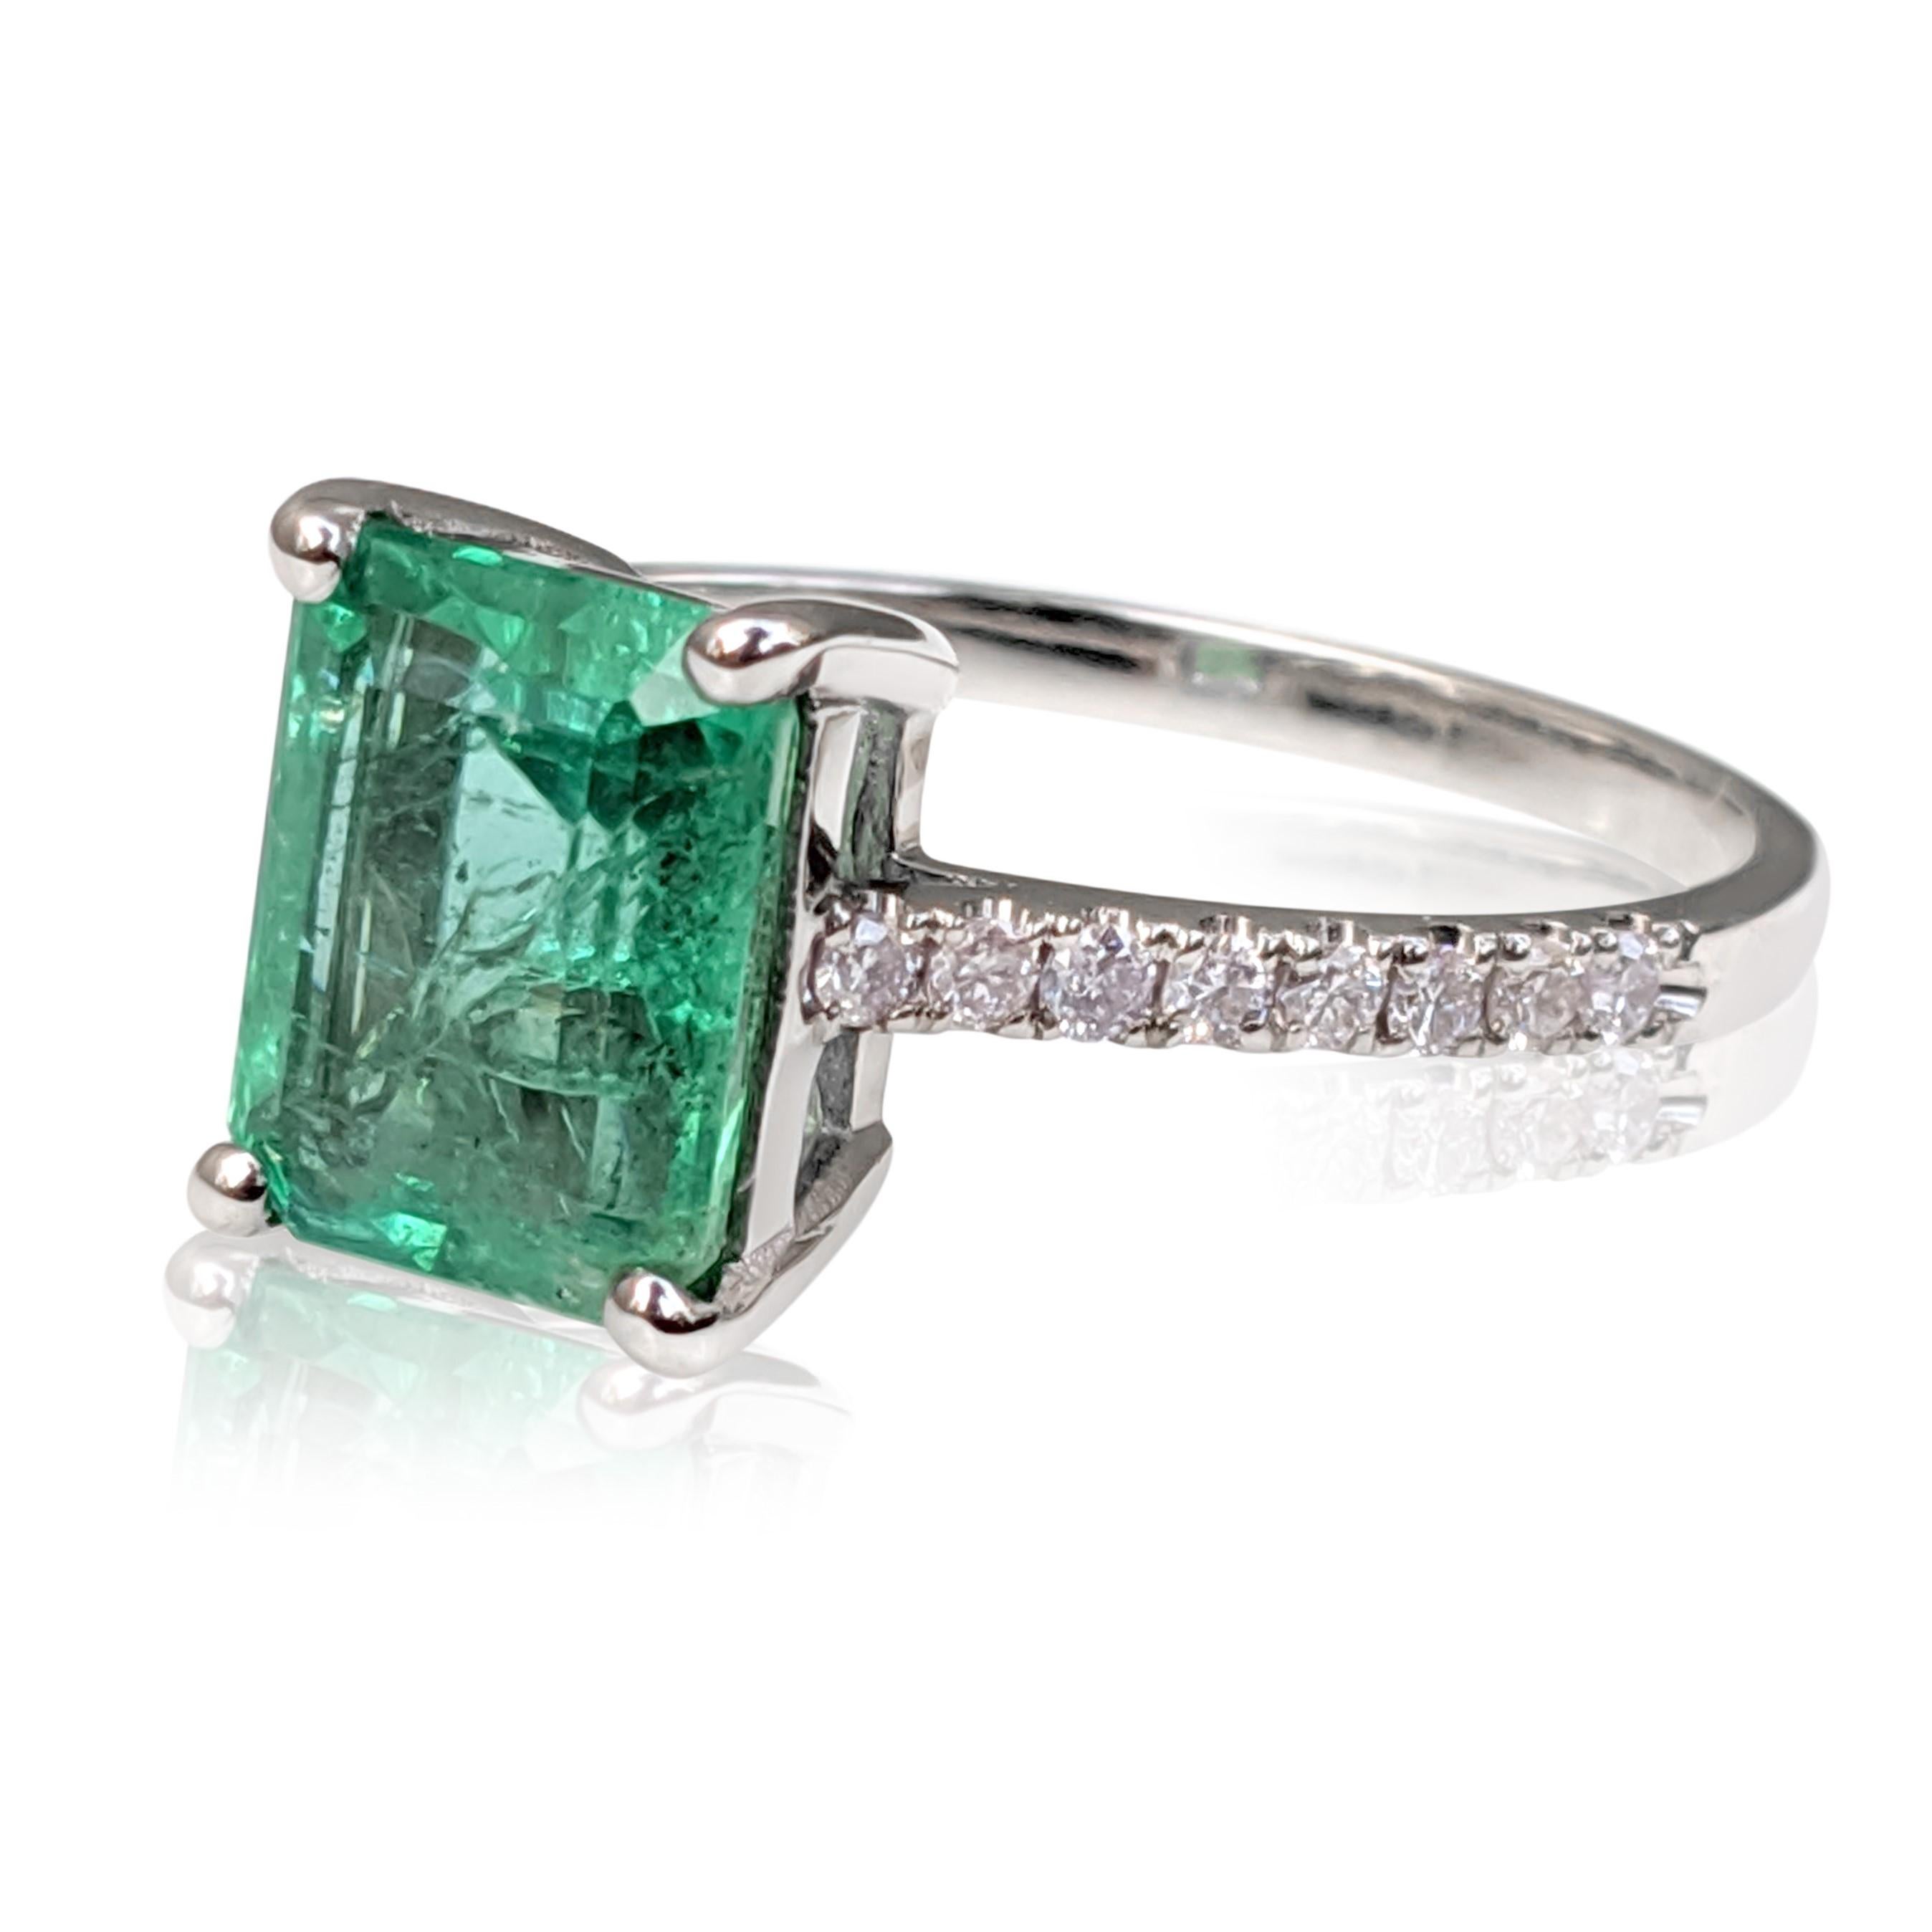 Emerald Cut NO RESERVE! 2.27 Carat Emerald and 0.21Ct Diamonds - 14 kt. White gold - Ring